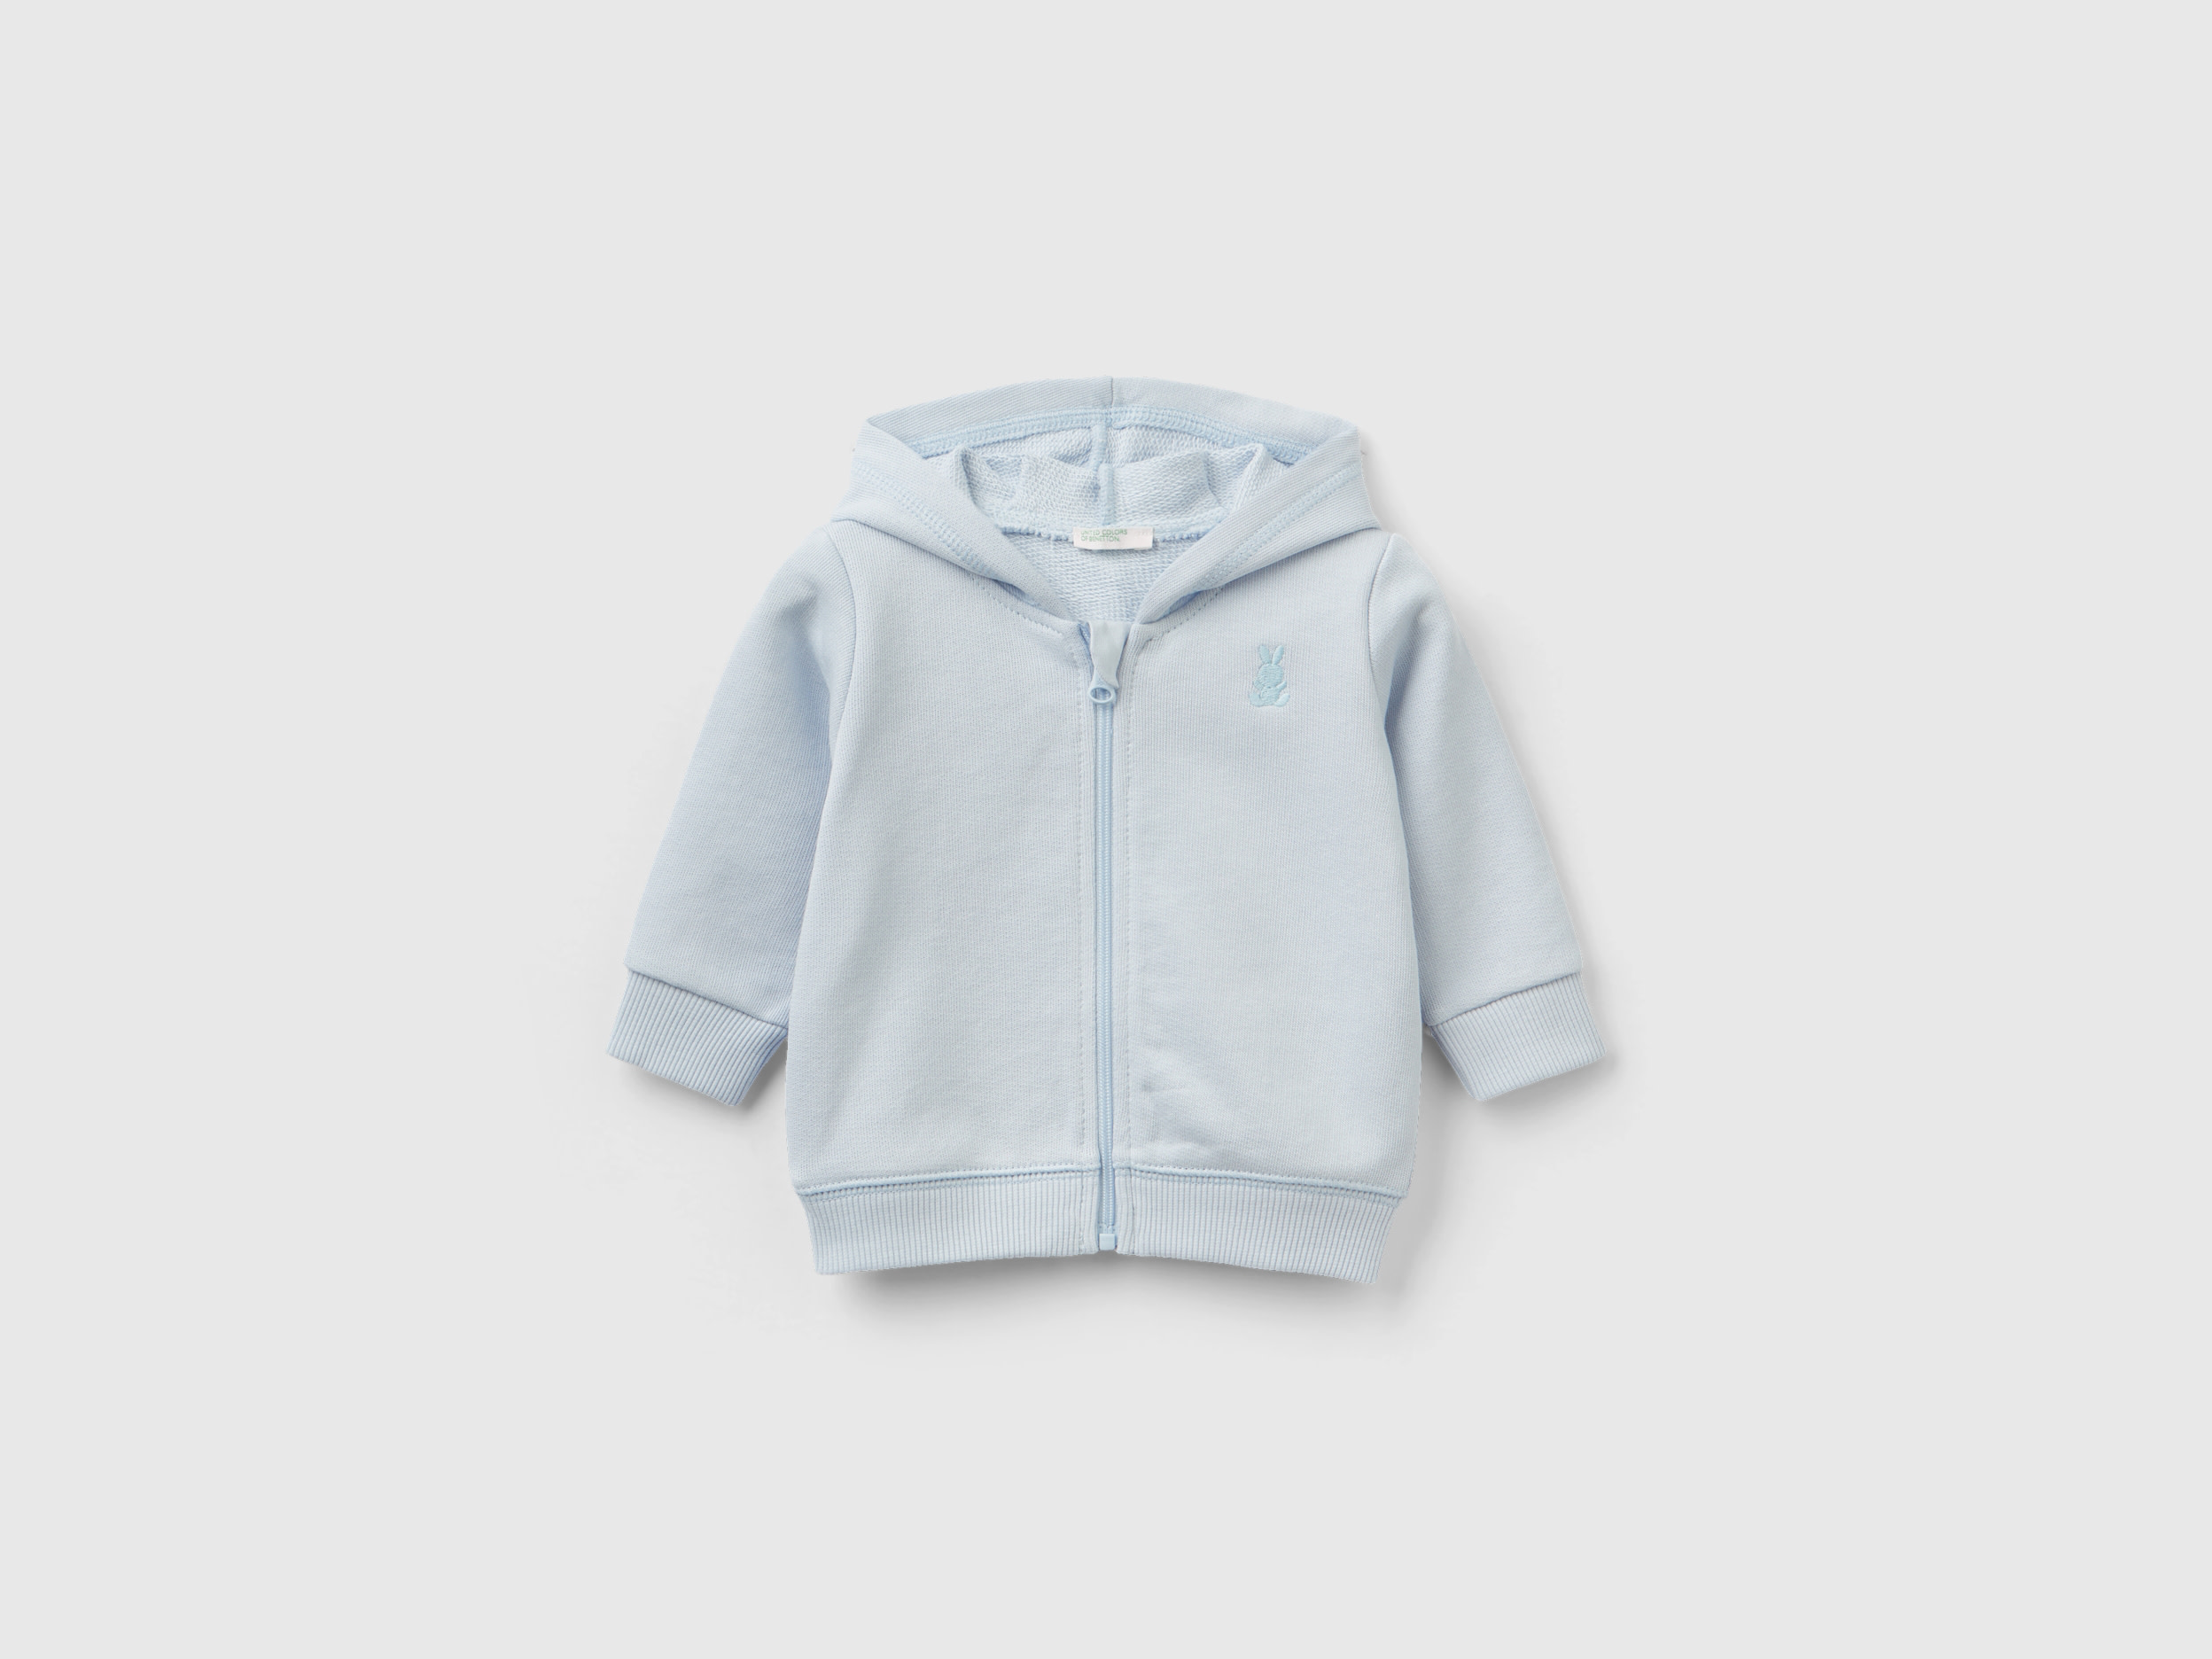 Image of Benetton, Hoodie In Organic Cotton, size 56, Sky Blue, Kids